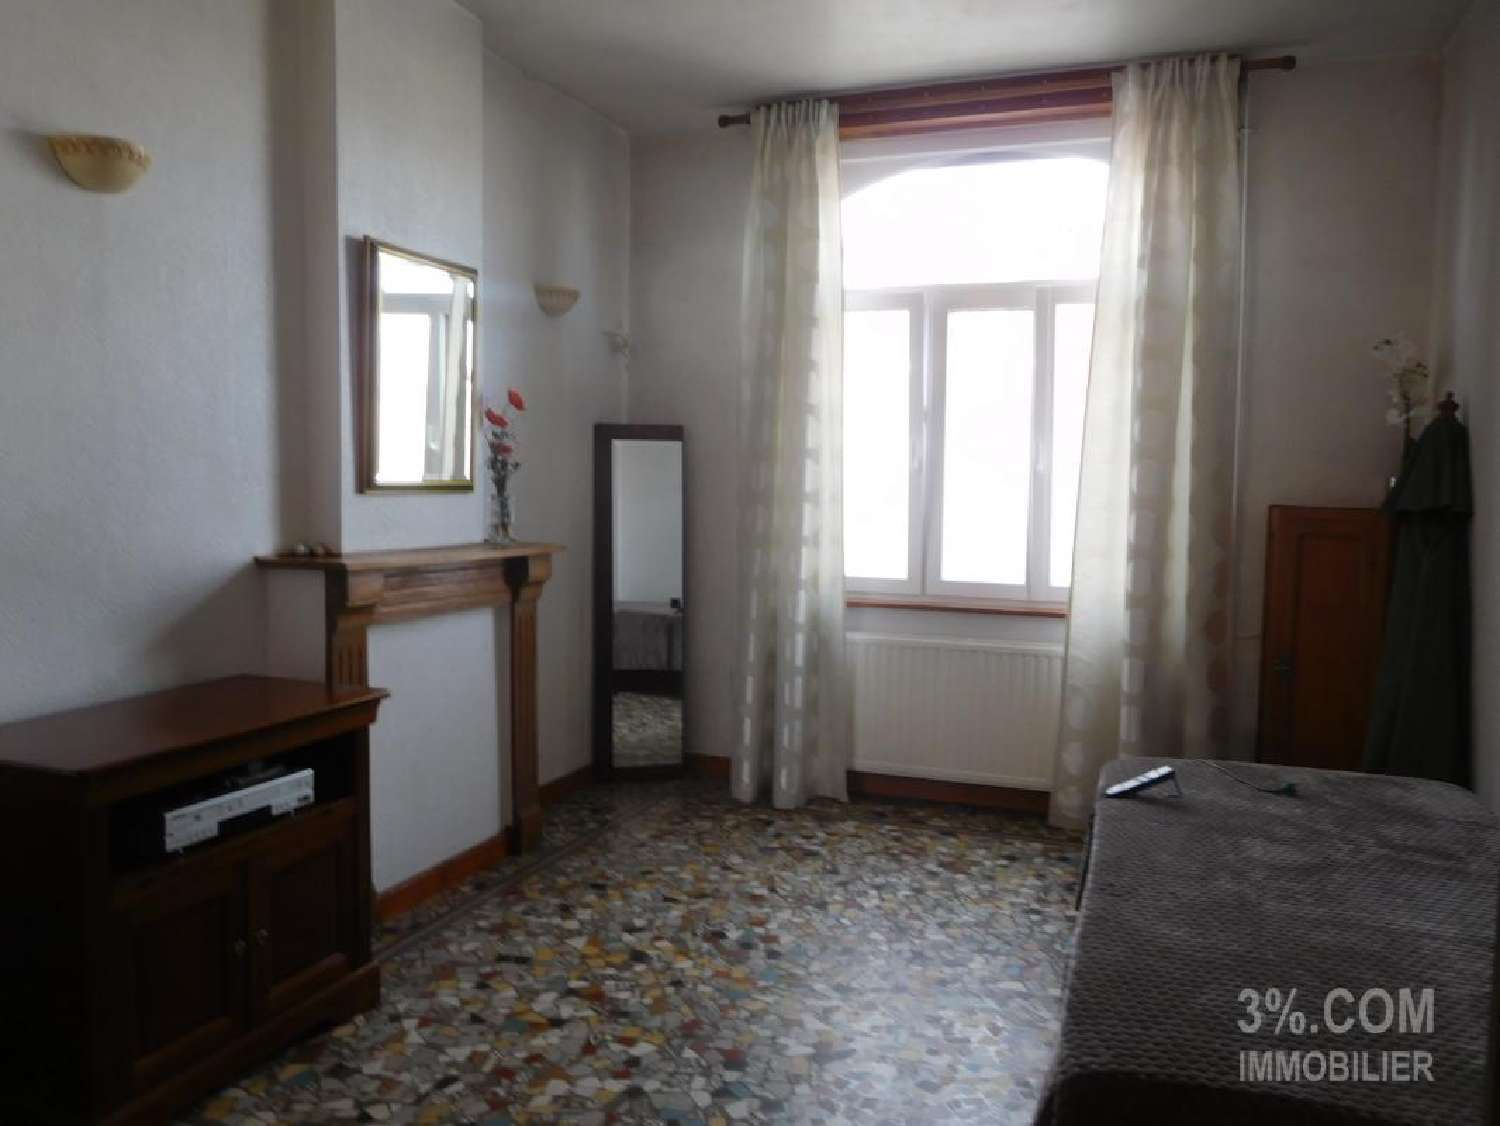  for sale house Lannoy Nord 2